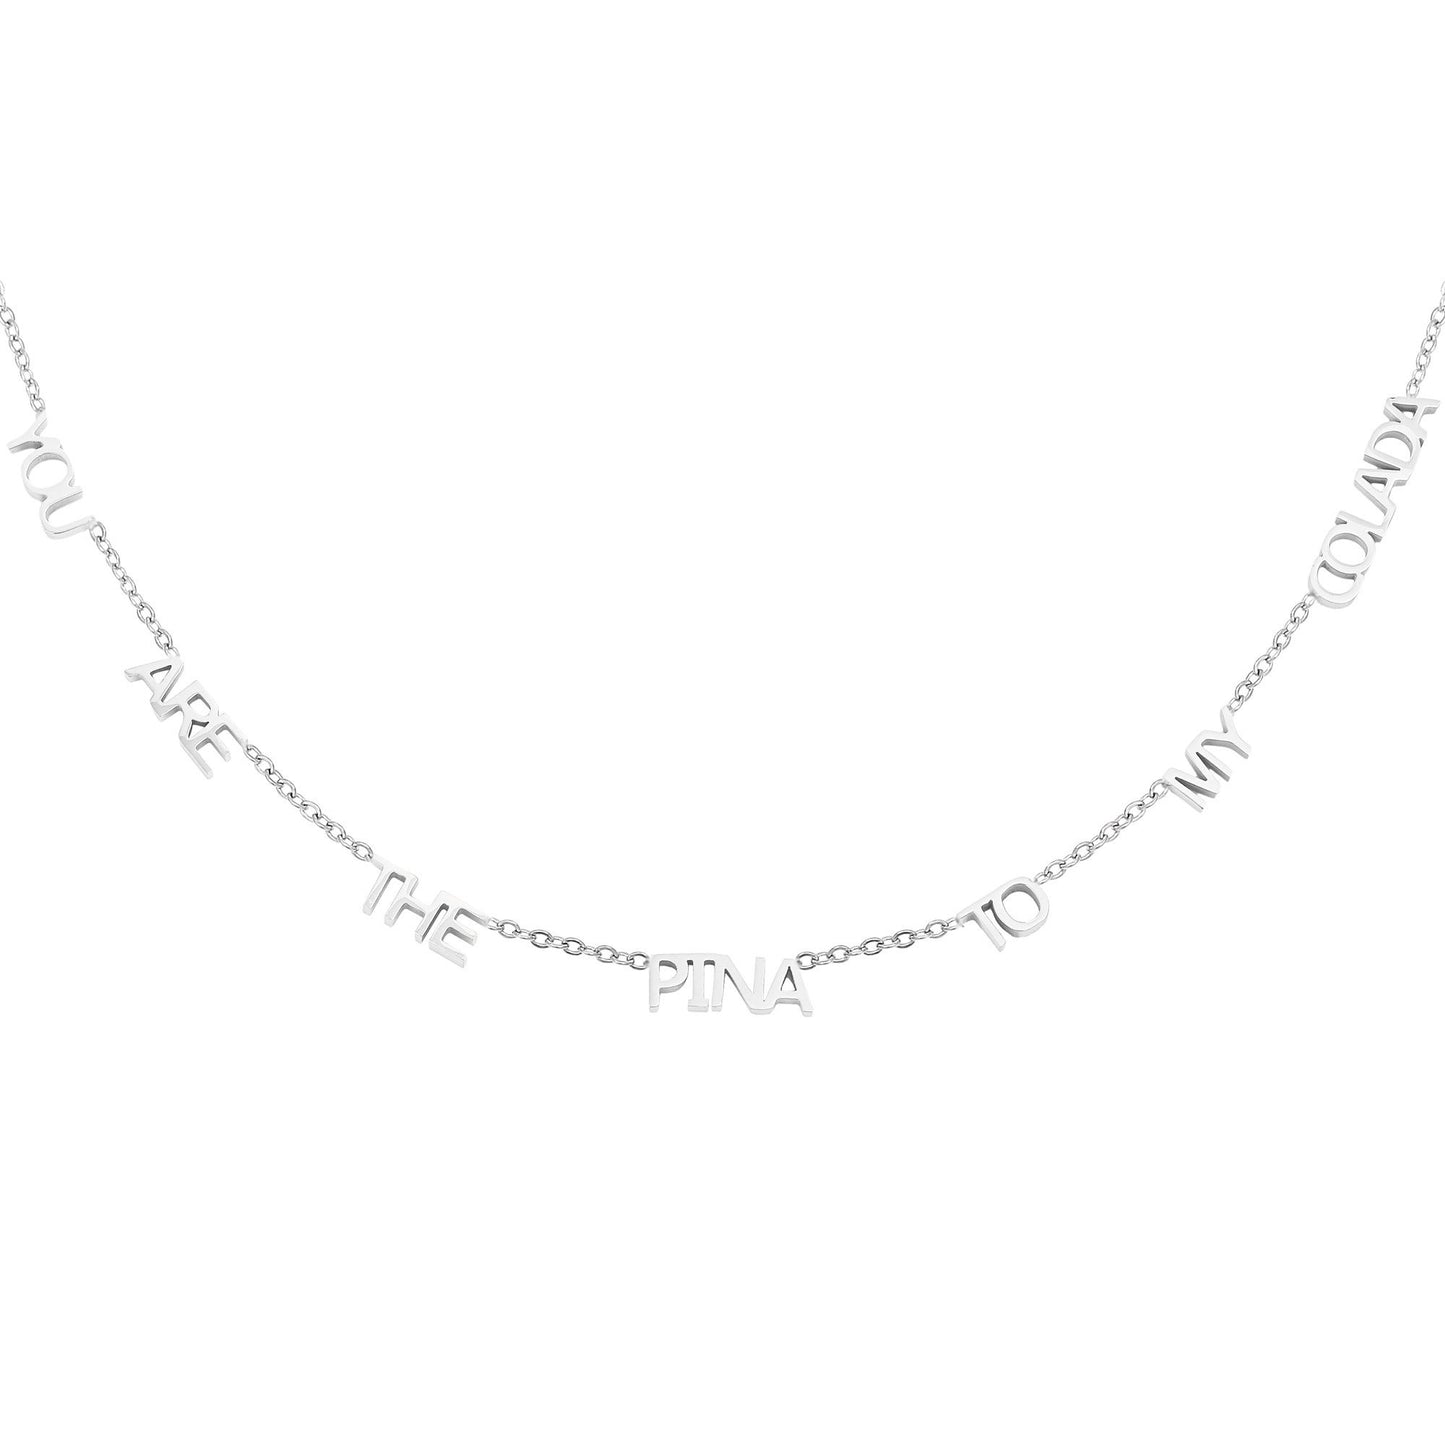 You Are The Pina To My Colada Necklace Silver And Gold - necklace gold, necklace silver, necklaces, Sale - You Are The Pina To My Colada Necklace Silver And Gold - ANNABO Online Store